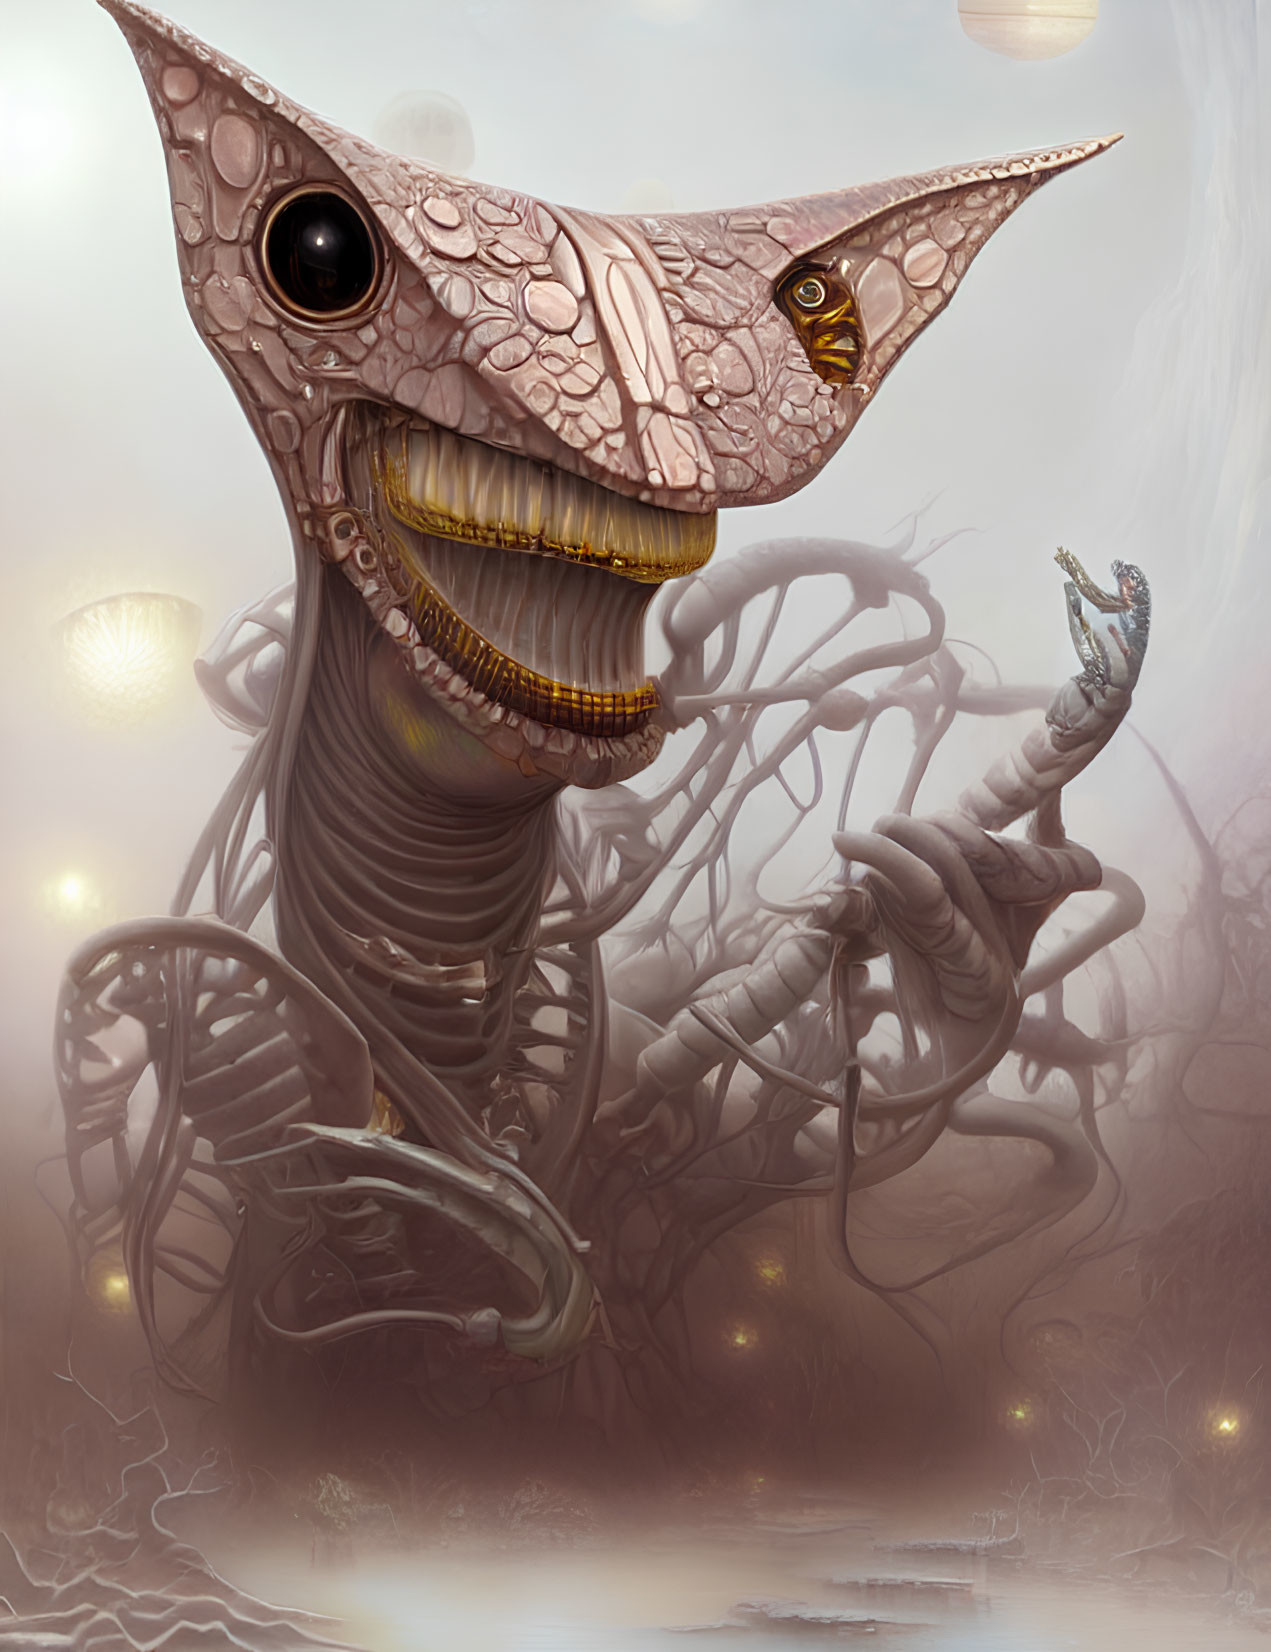 Fantastical creature with tentacles, large teeth, and oversized eye in misty setting